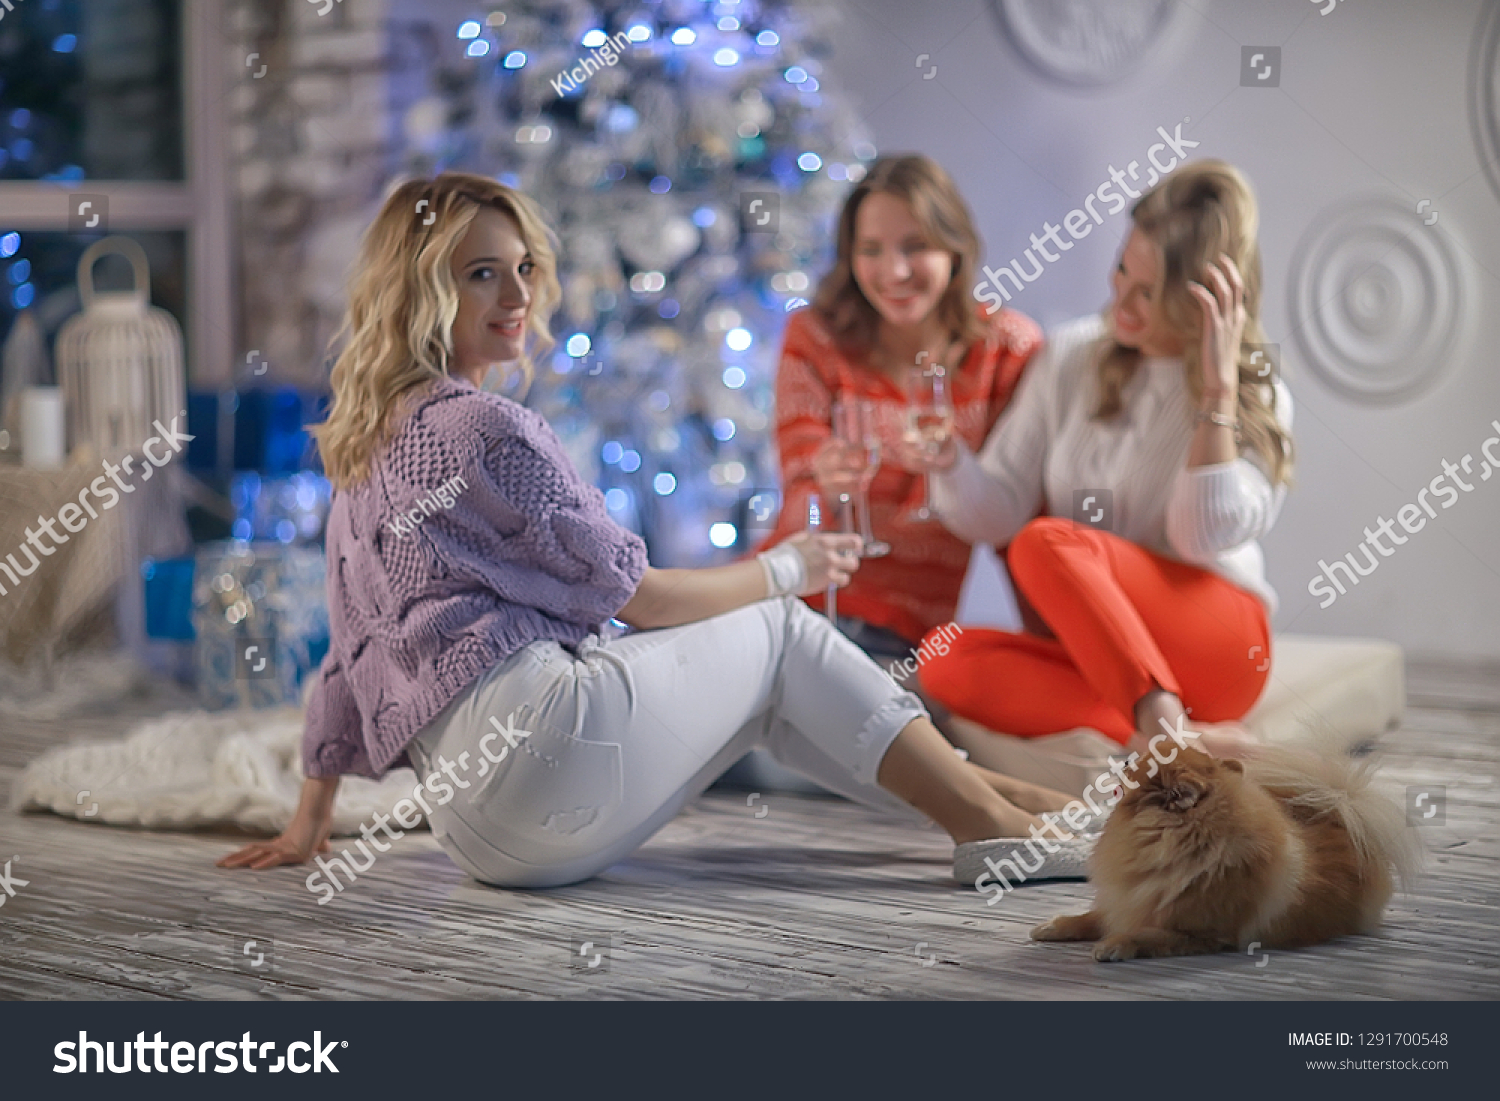 Christmas girlfriend girlfriend / girls drink champagne on New Year's holiday, women on holiday #1291700548